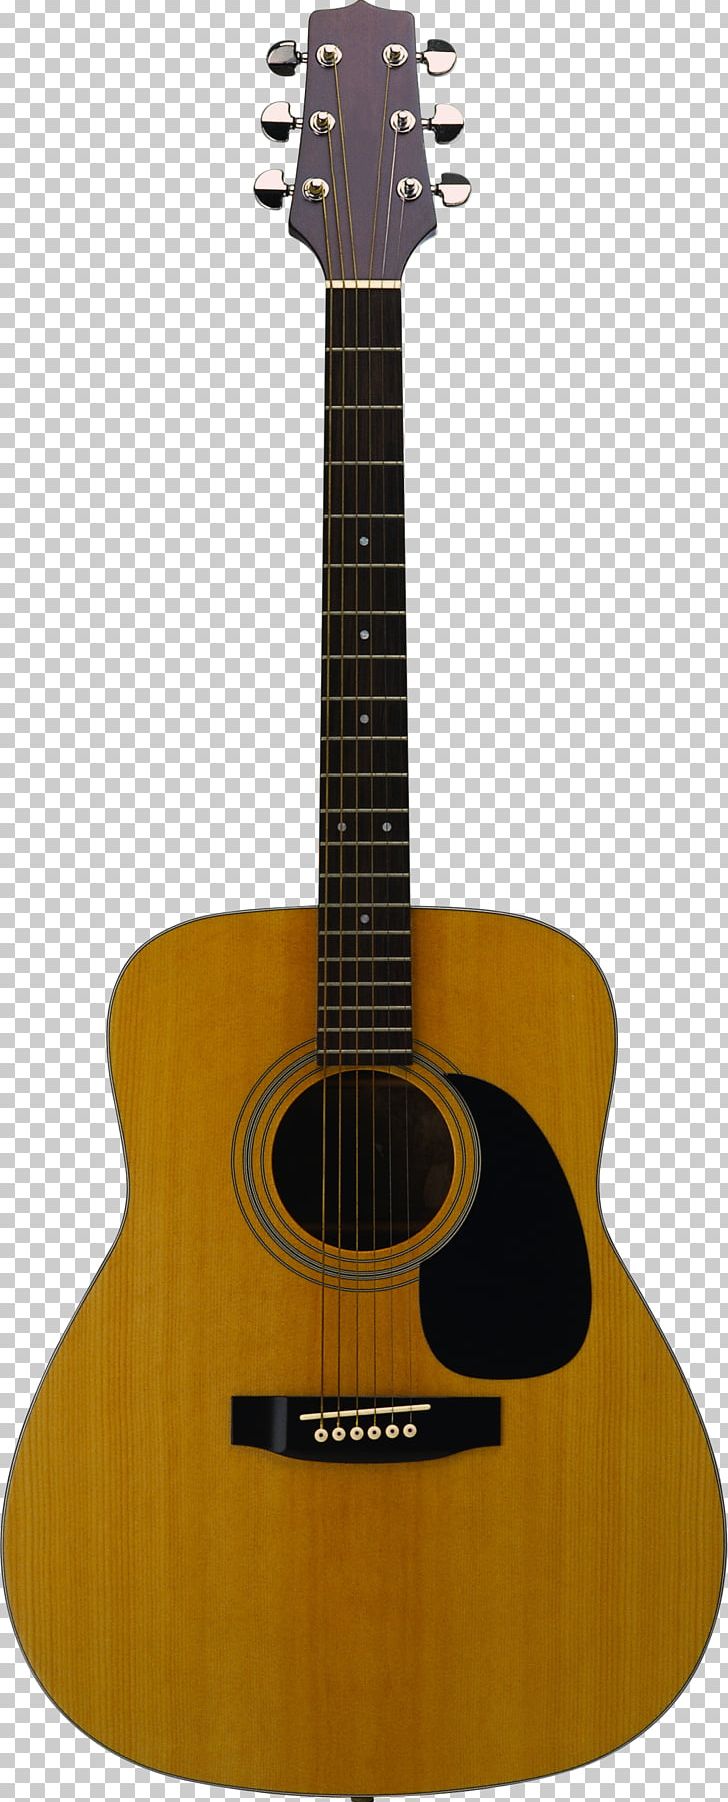 Guitar Computer File PNG, Clipart, Acoustic Electric Guitar, Cuatro, Electric Guitar, Free, Guitar Free PNG Download